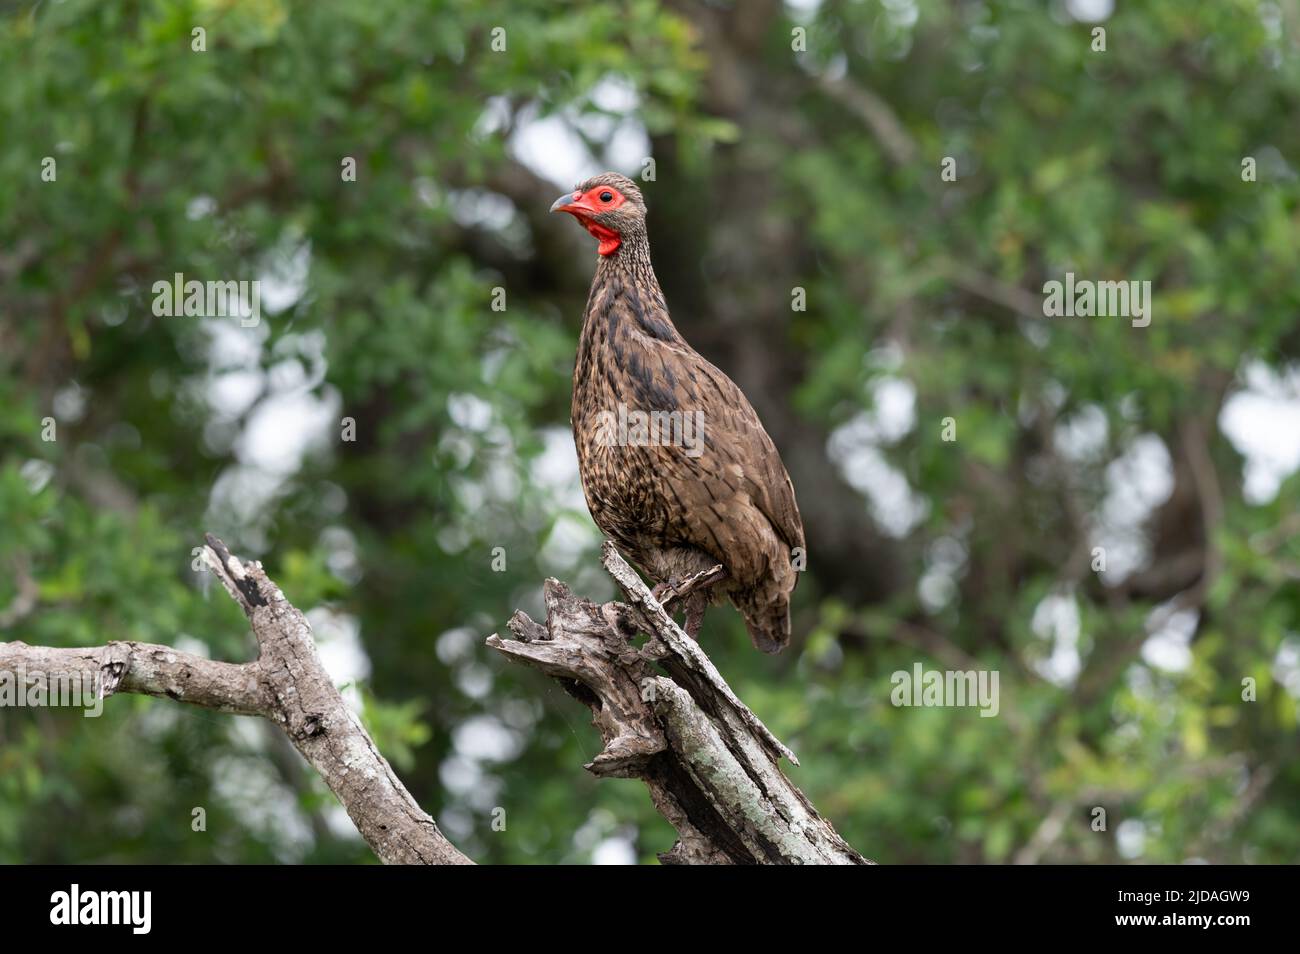 A Swainson's spurfowl, Pternistis swainsonii, stands at the top of a branch Stock Photo